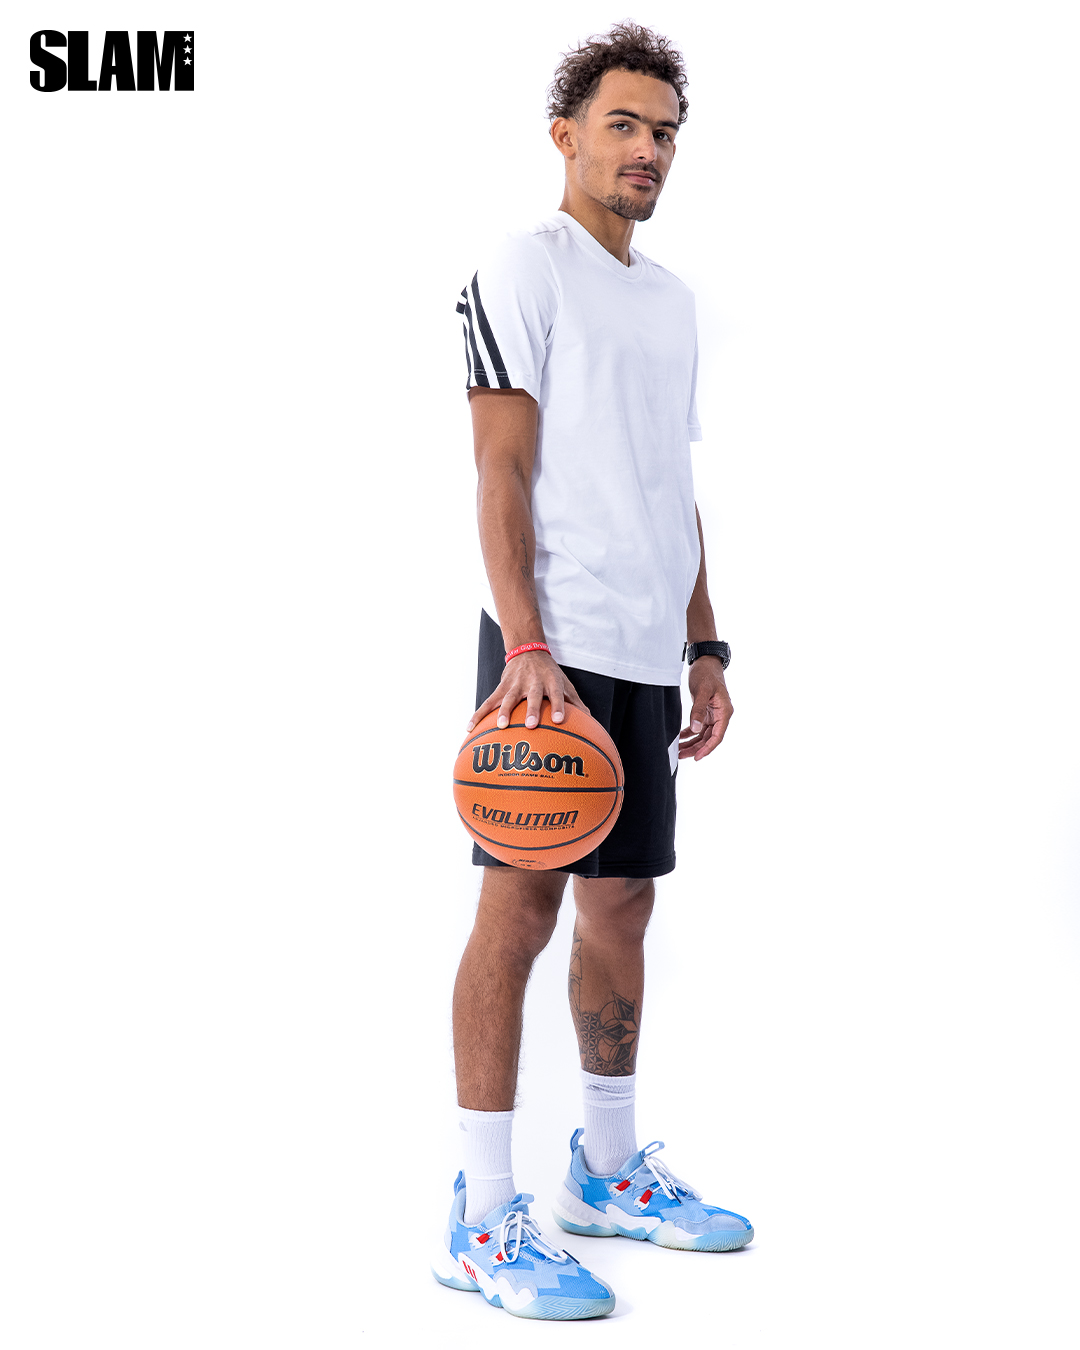 Trae Young's First Adidas Signature Sneaker Is Releasing Soon